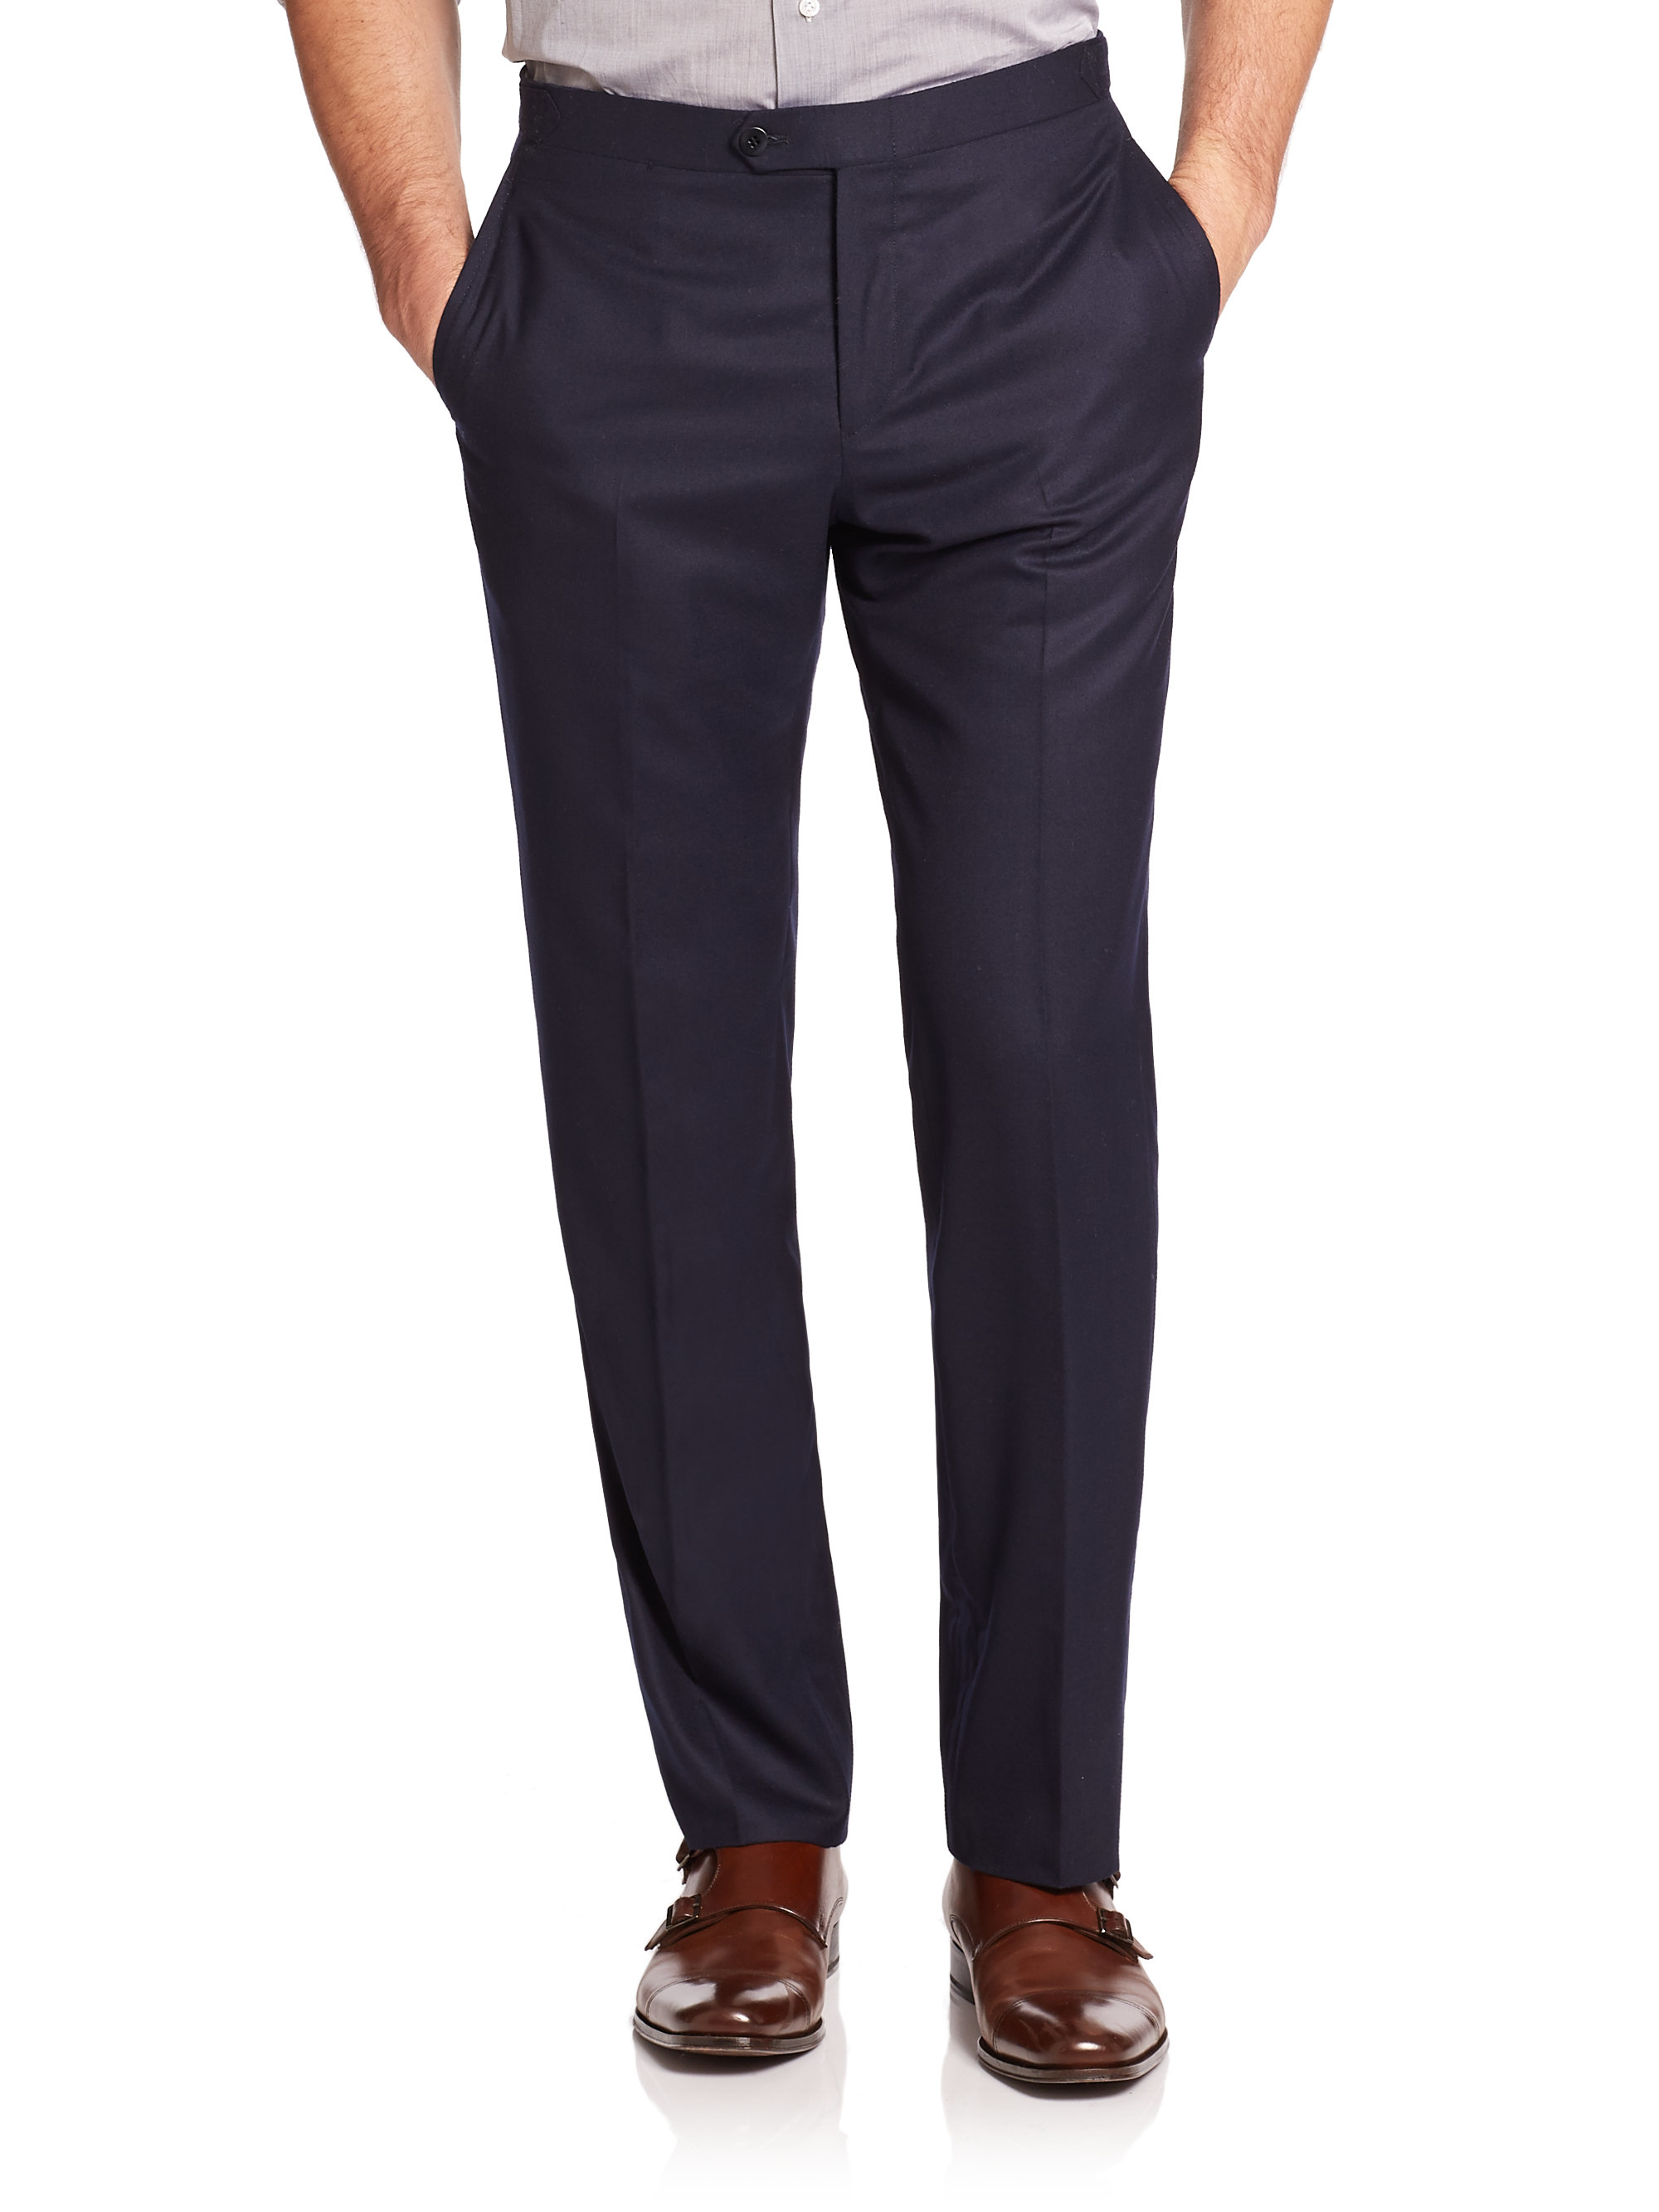 Isaia Flat-front Italian Wool Pants in Blue for Men - Lyst